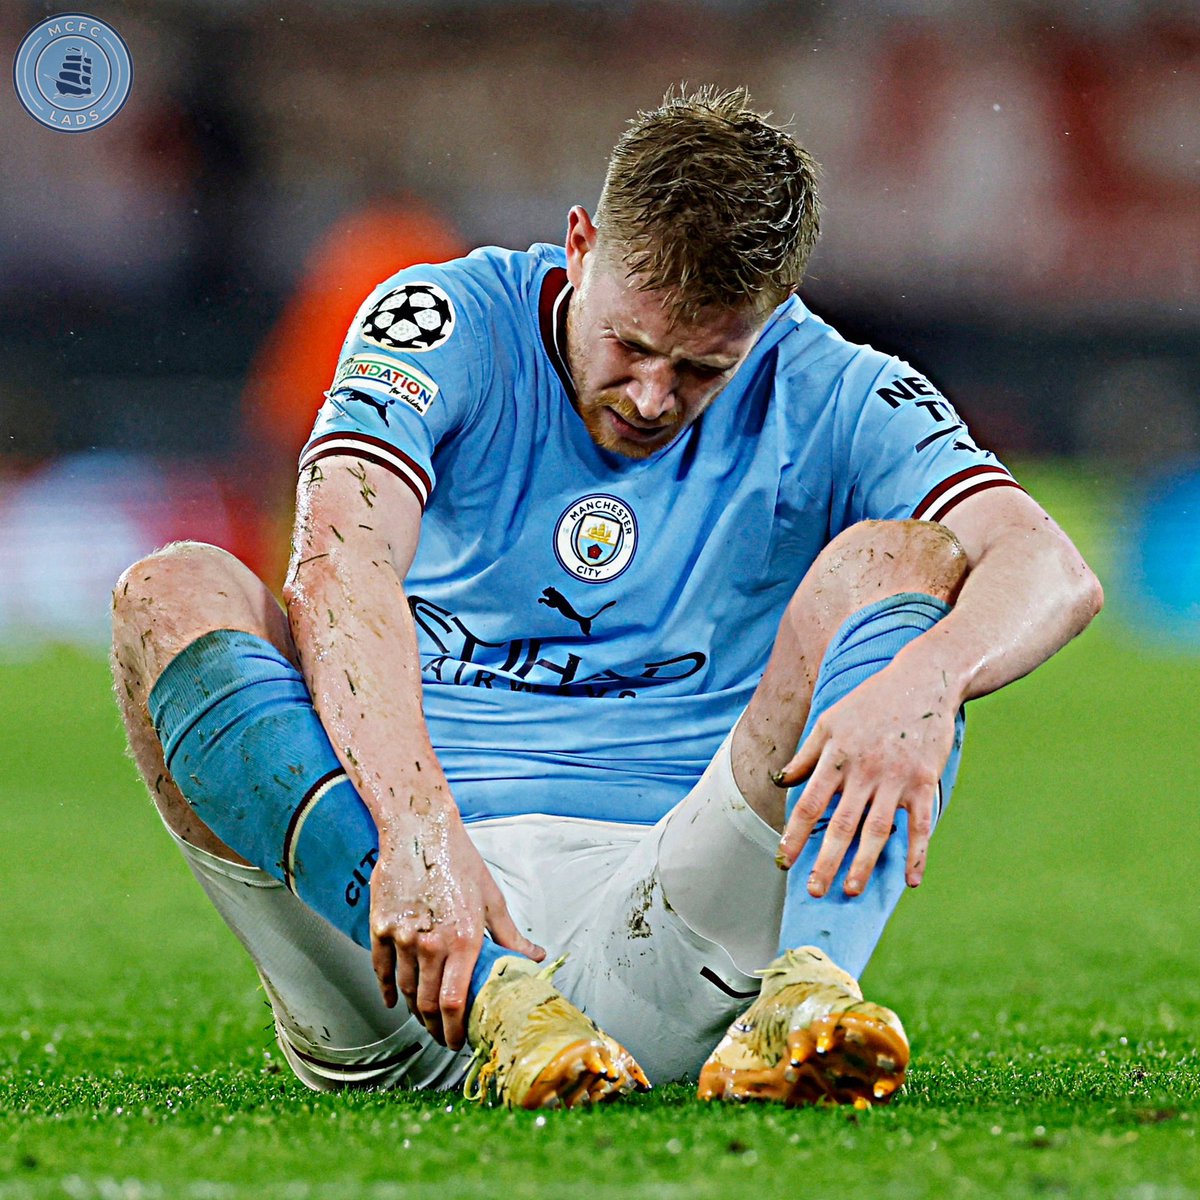 Kevin De Bruyne injured his hamstring in mid April at the Allianz arena. This was an injury that it would typical take 6 weeks to recover from. 

With the full support of the player and Guardiola, the performance team, comprising more than 30 staff in total, used daily ultrasound…